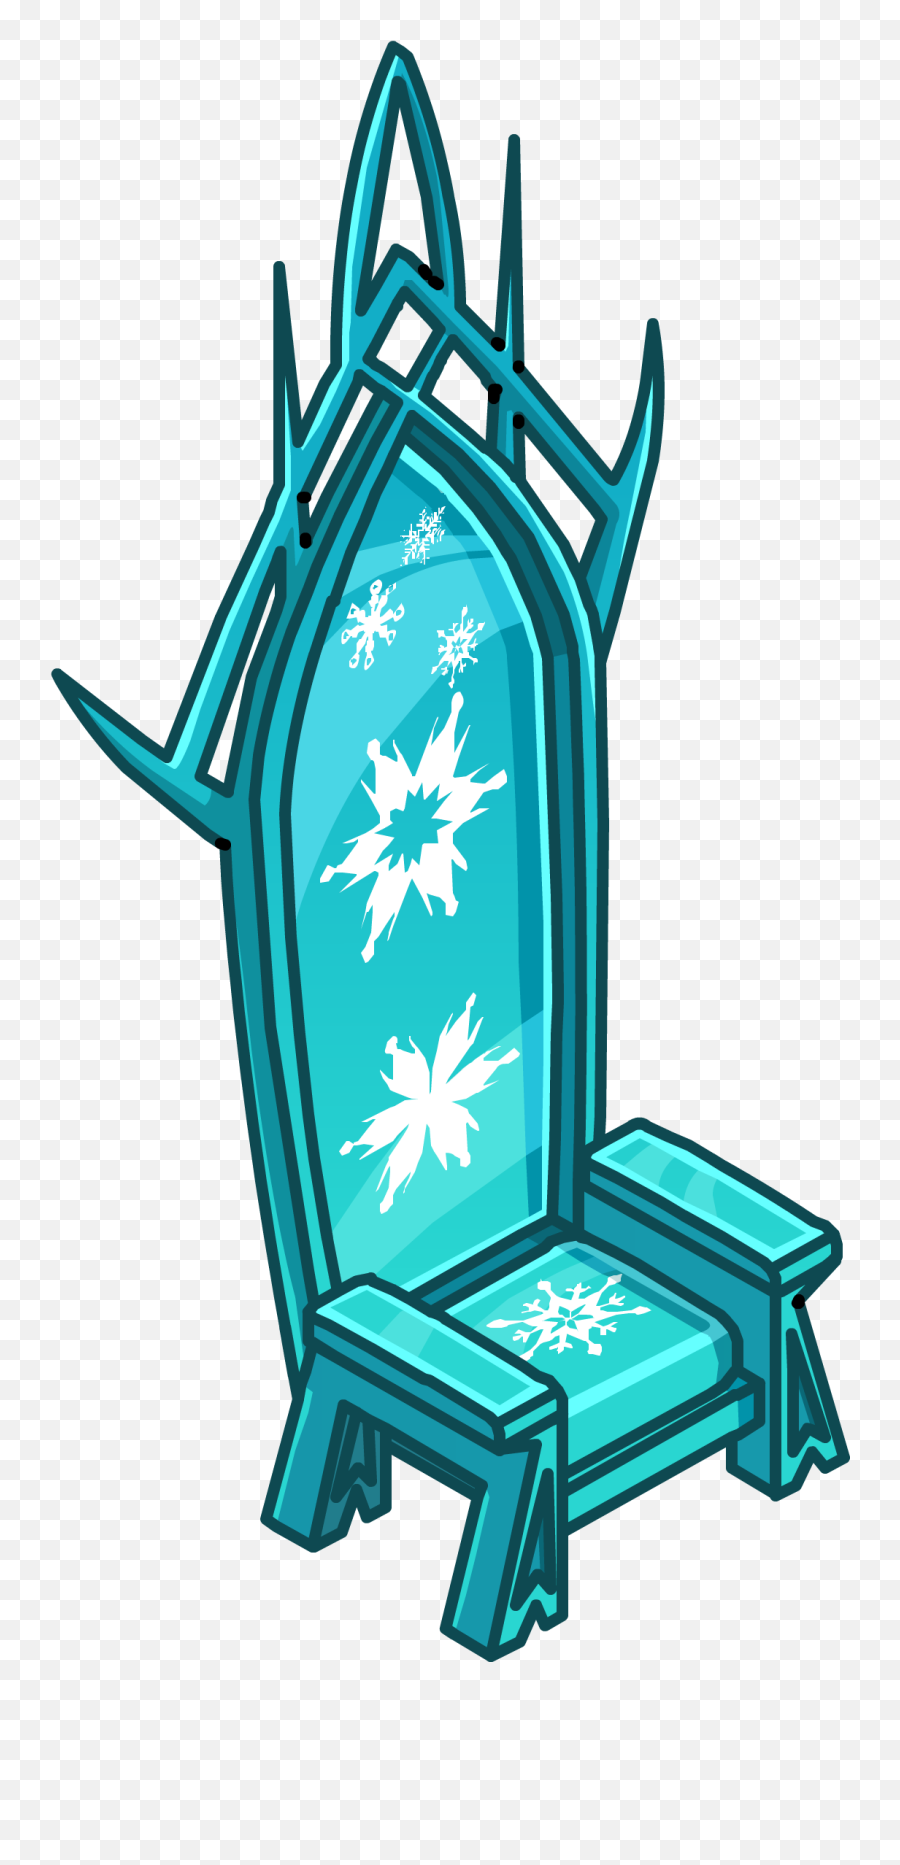 Download Ice Throne Icon - Ice Throne Png Png Image With No Frozen Elsa Throne Png,Ice Icon Png